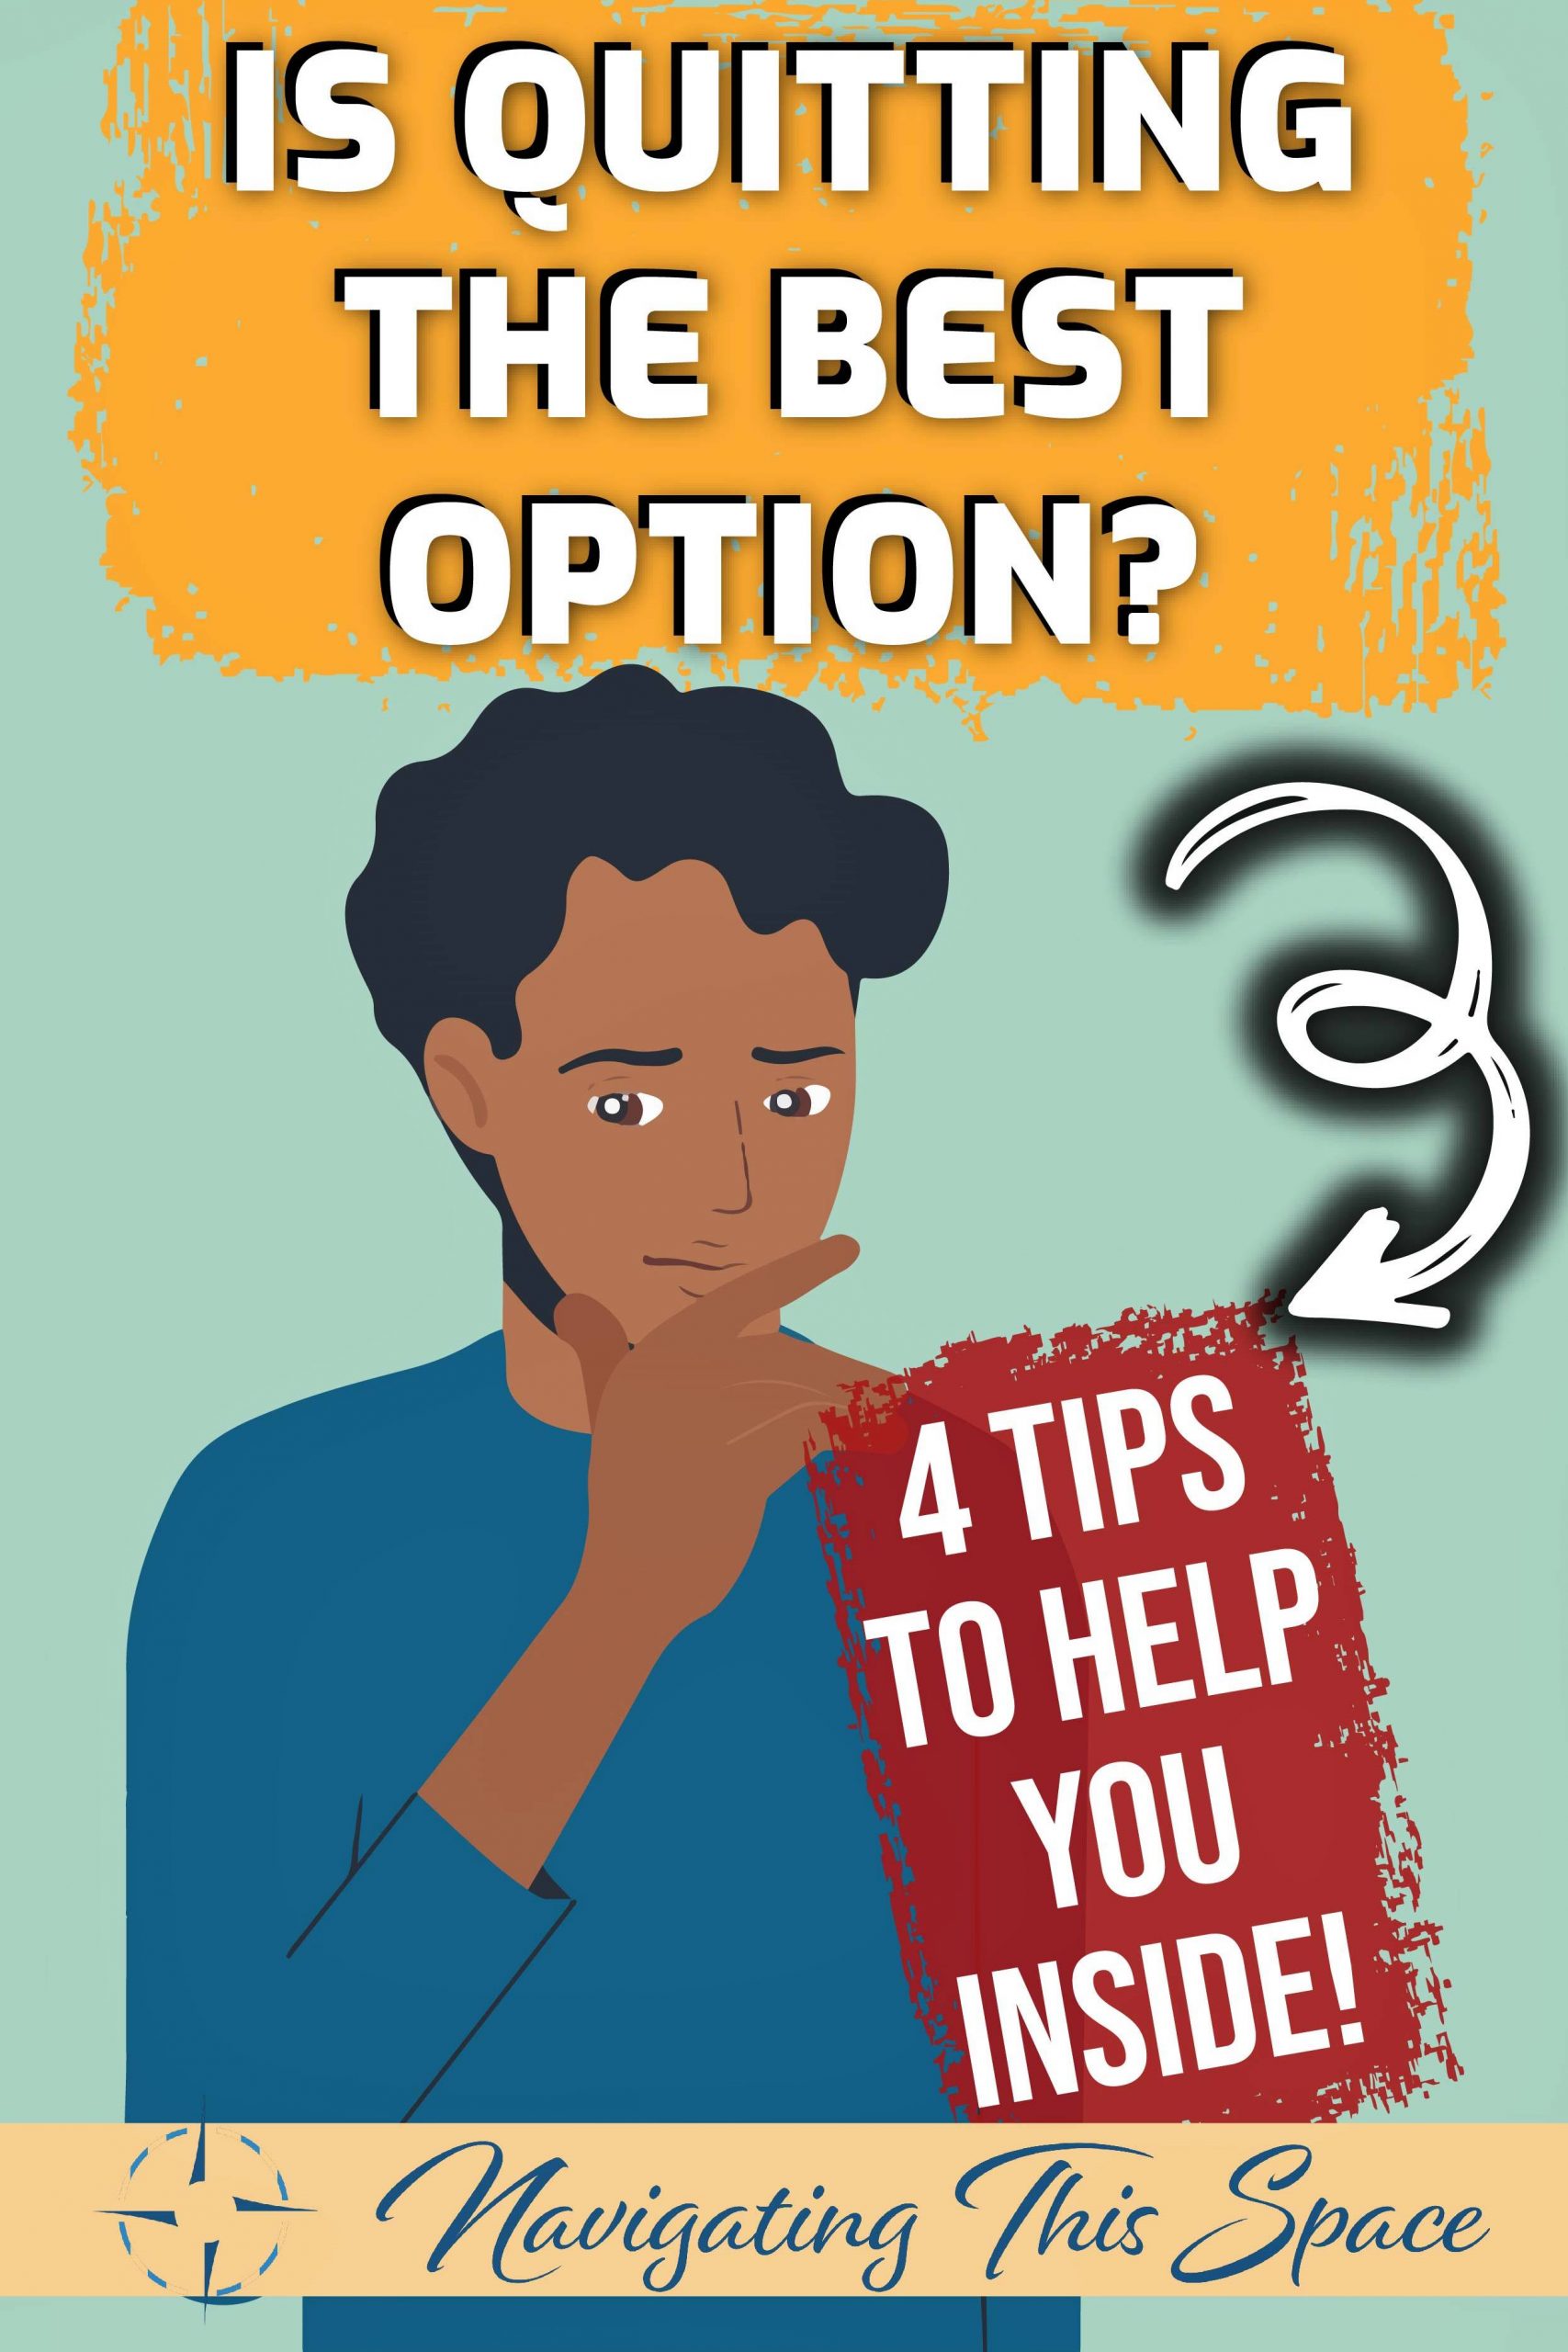 Is quitting the best option? 4 Tips to help you inside!